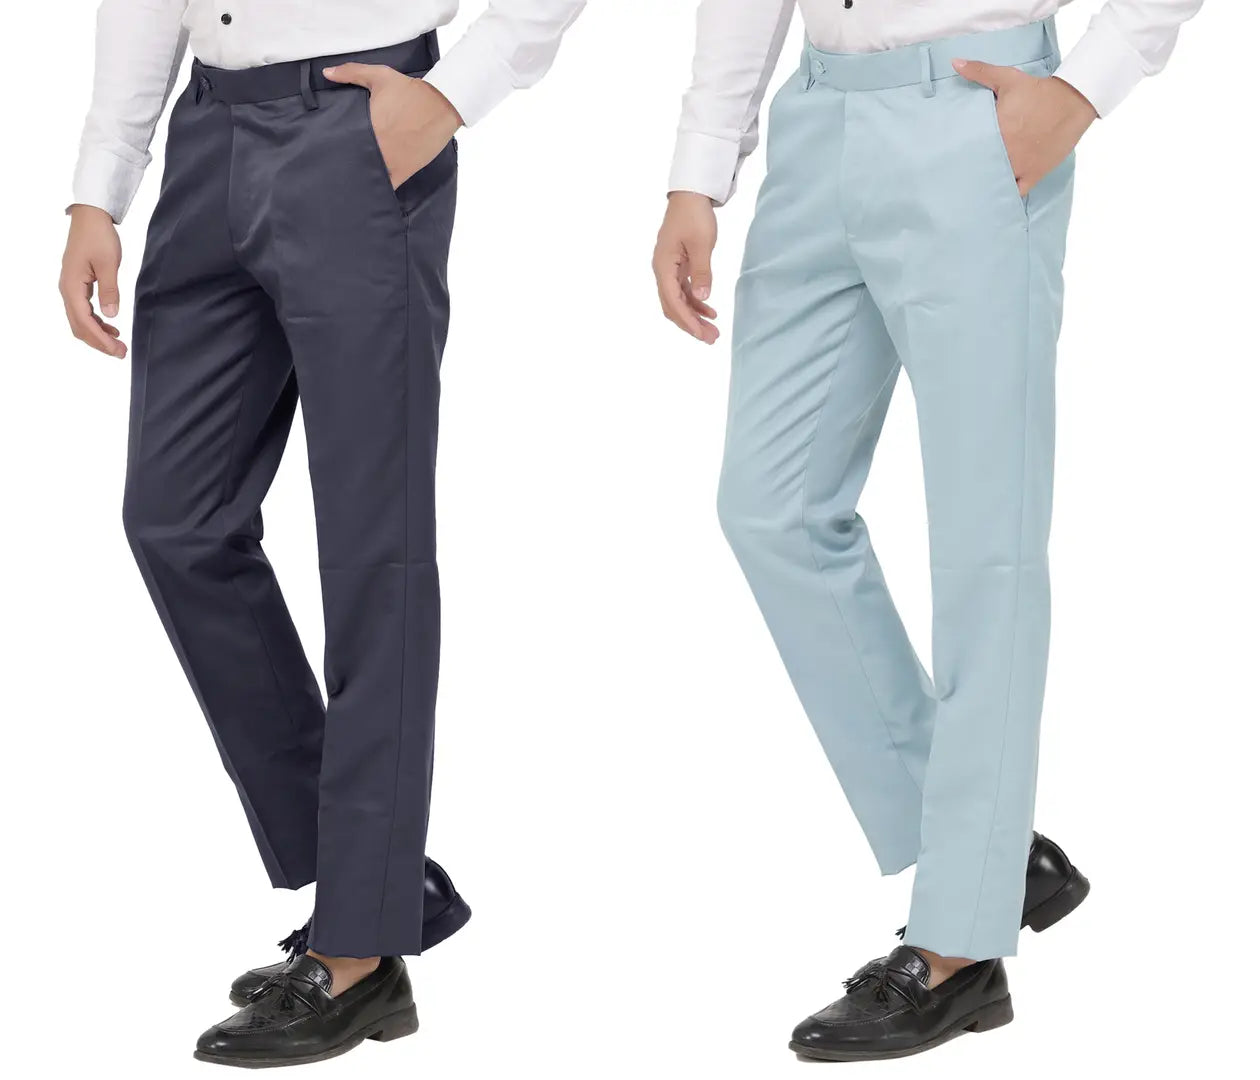 Kundan Men Poly-Viscose Blended Dark Grey and Light Sky Blue Formal Trousers ( Pack of 2 Trousers )